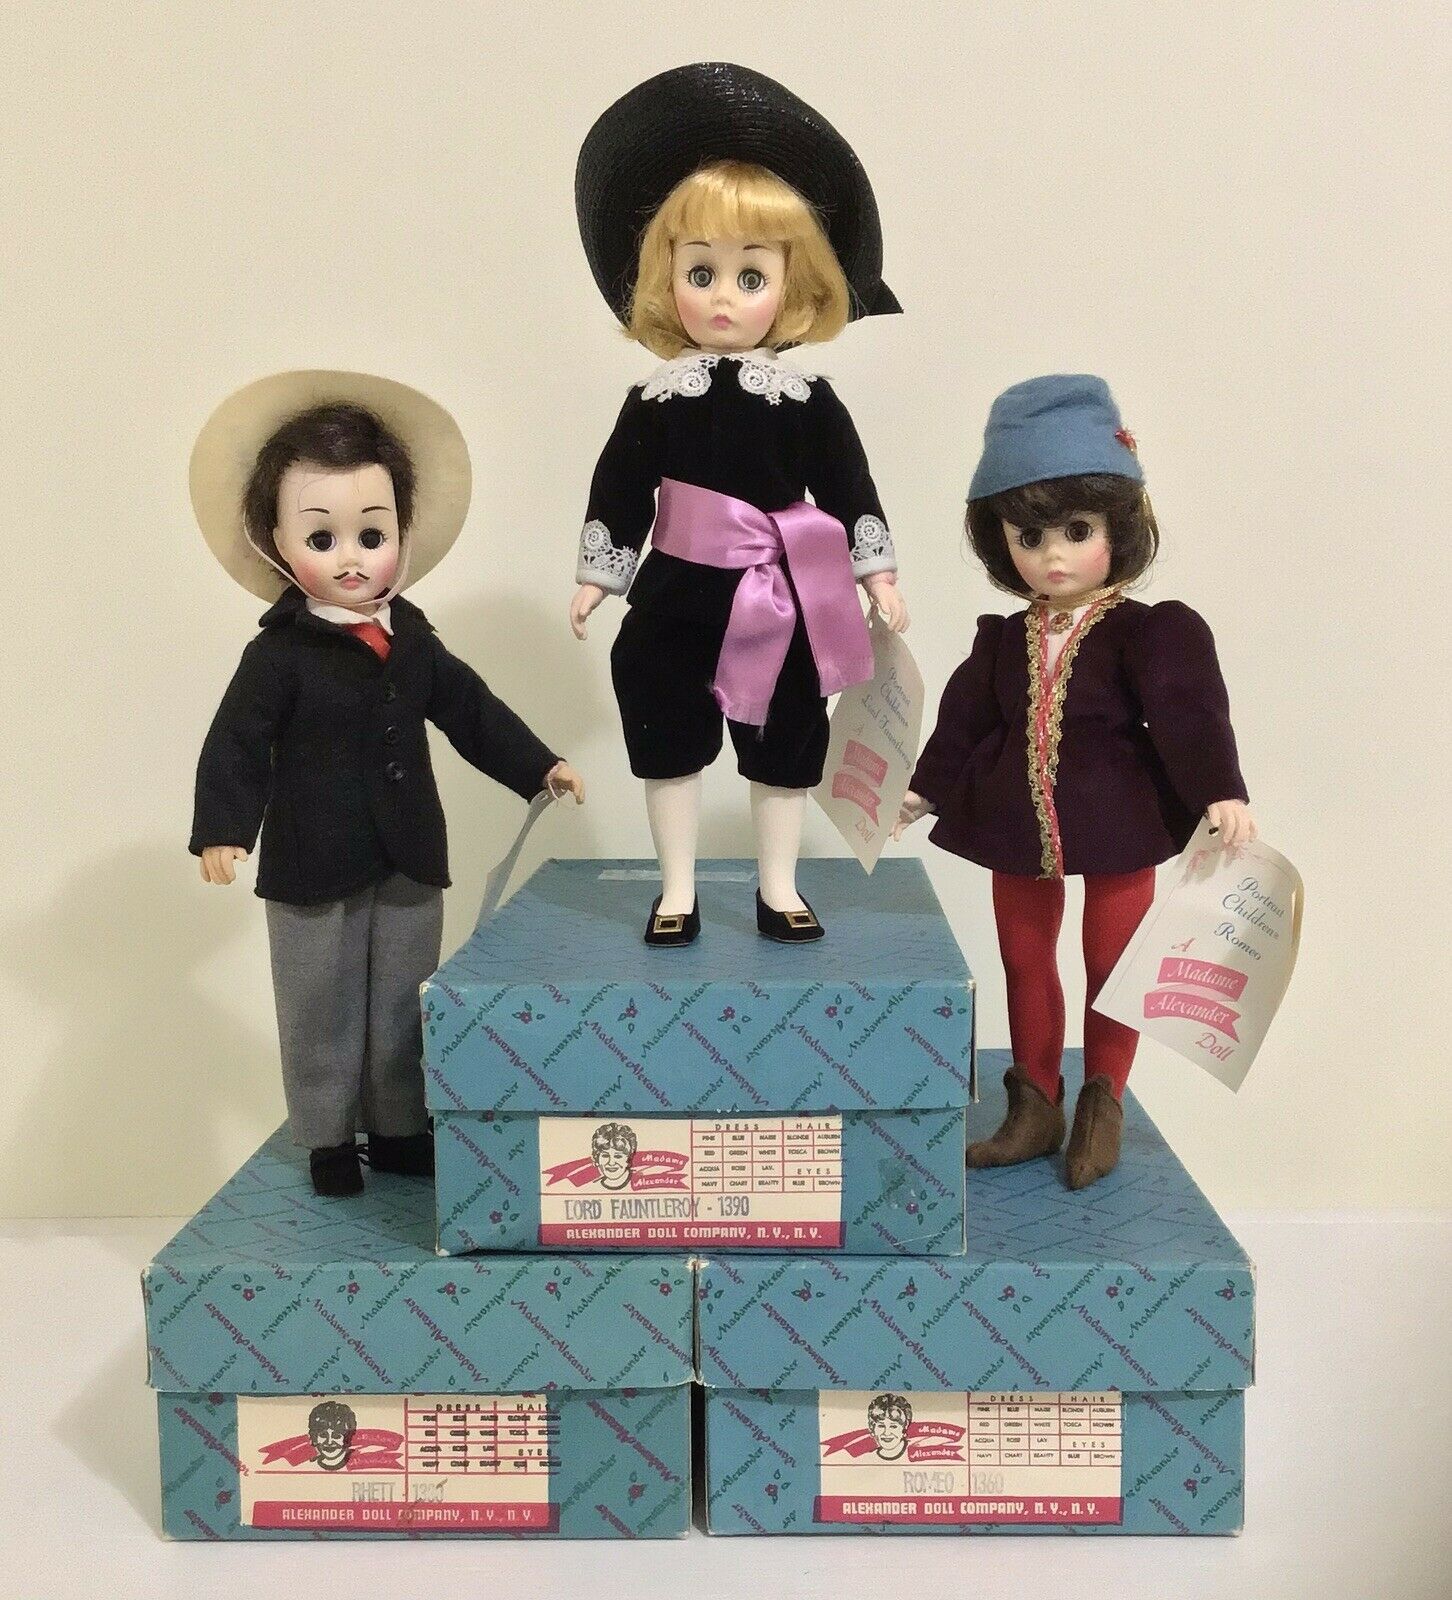 Lot Of 3 Vintage Madame Alexander 12” Dolls In Euc With Original Boxes